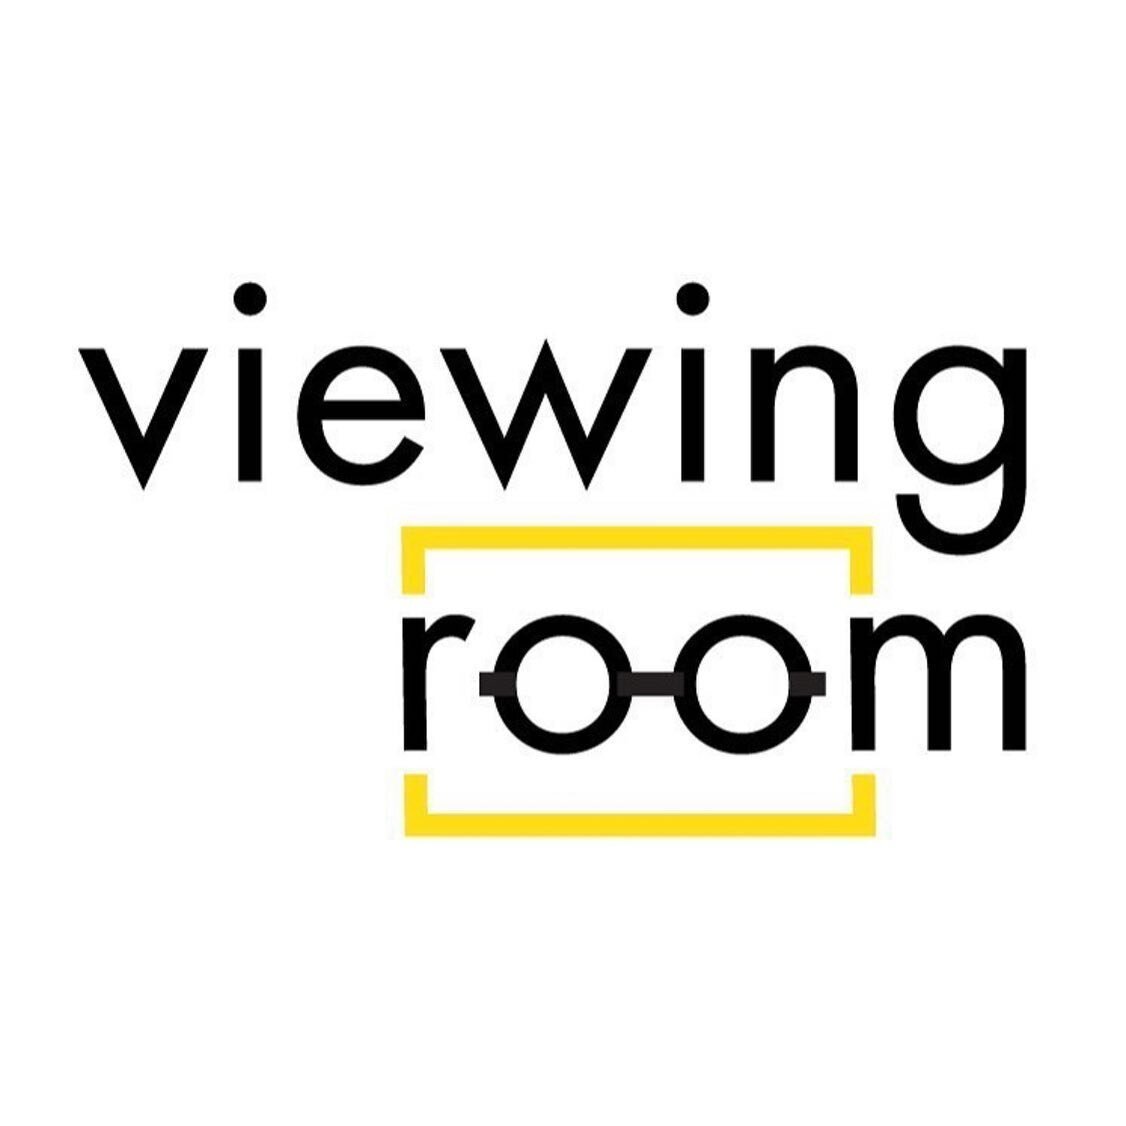 There is still time to make your appointment to experience the collaborative show &lsquo;Viewing Room&rsquo; at @studioegallery, open through July 11!
On view are pieces that curator Dawna Holloway says that she can &ldquo;look at forever&rdquo;. Mak